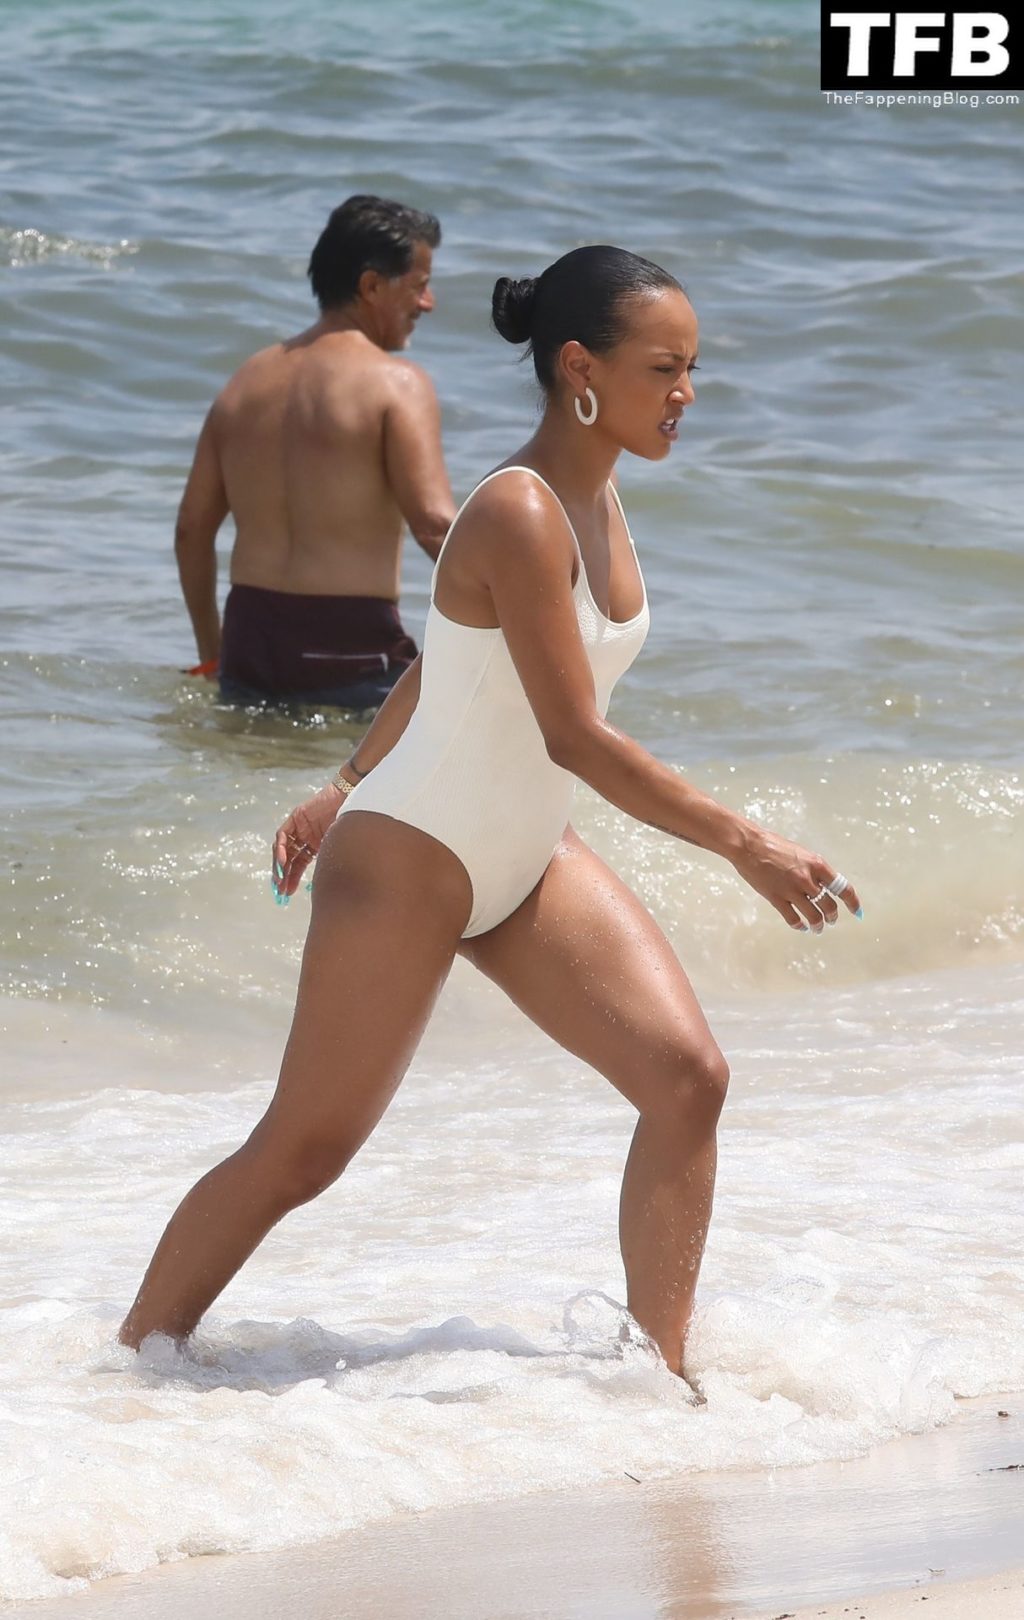 Karrueche Tran Sexy The Fappening Blog 39 1024x1620 - Karrueche Tran Looks Incredible in a White Swimsuit on the Beach in Miami (45 Photos)